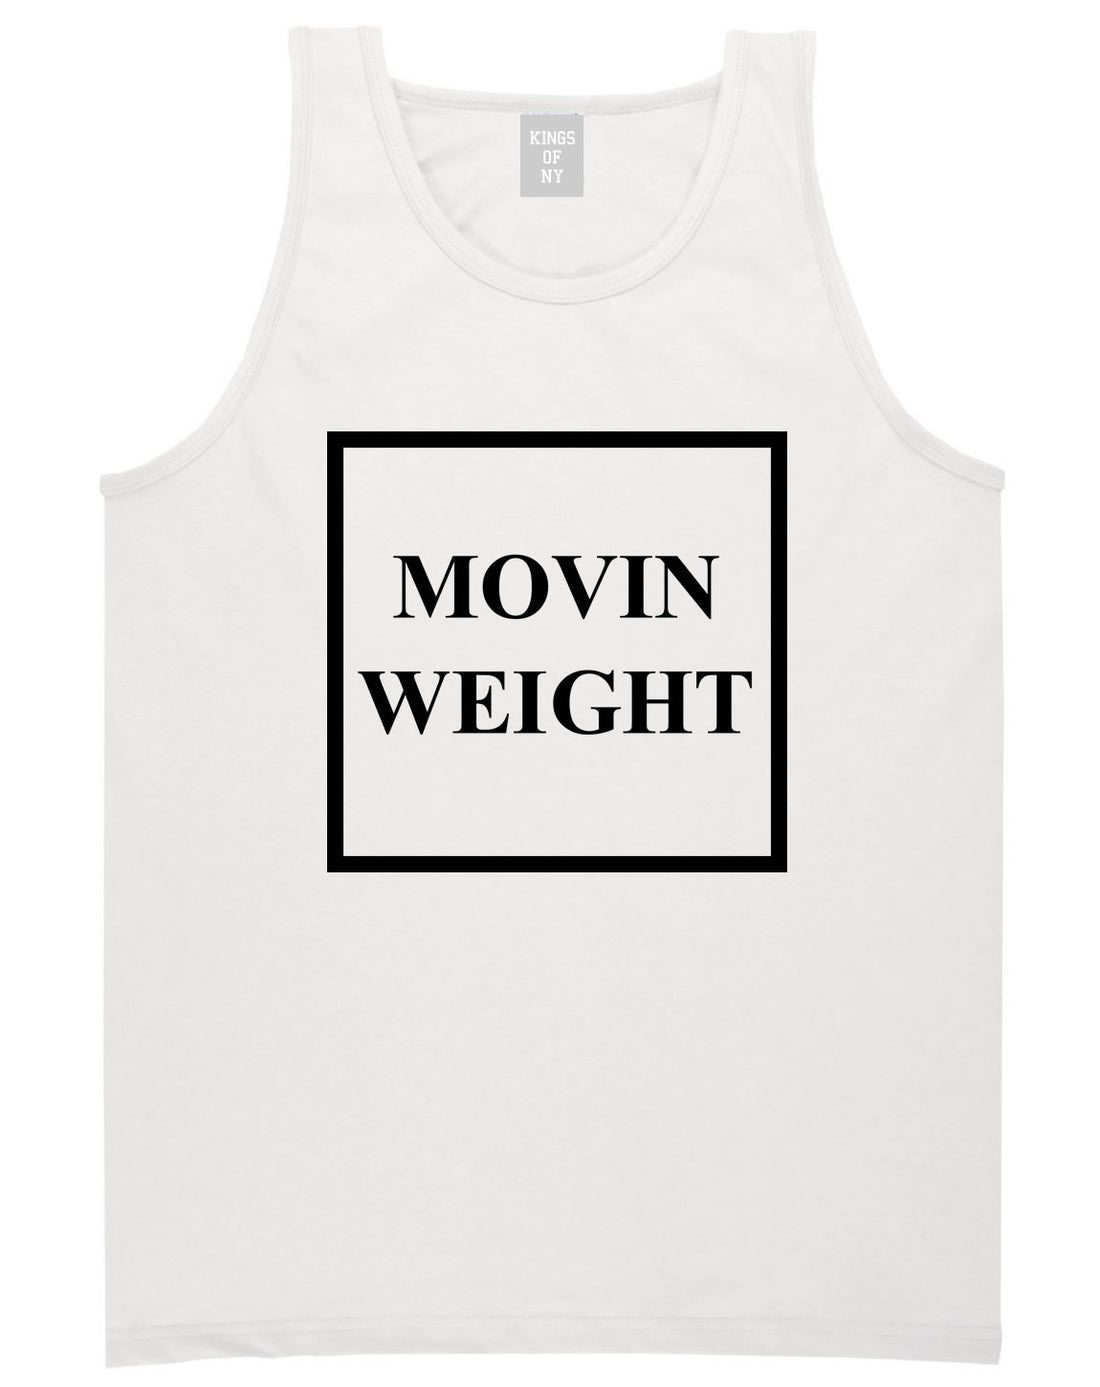 Movin Weight Hustler Tank Top in White by Kings Of NY